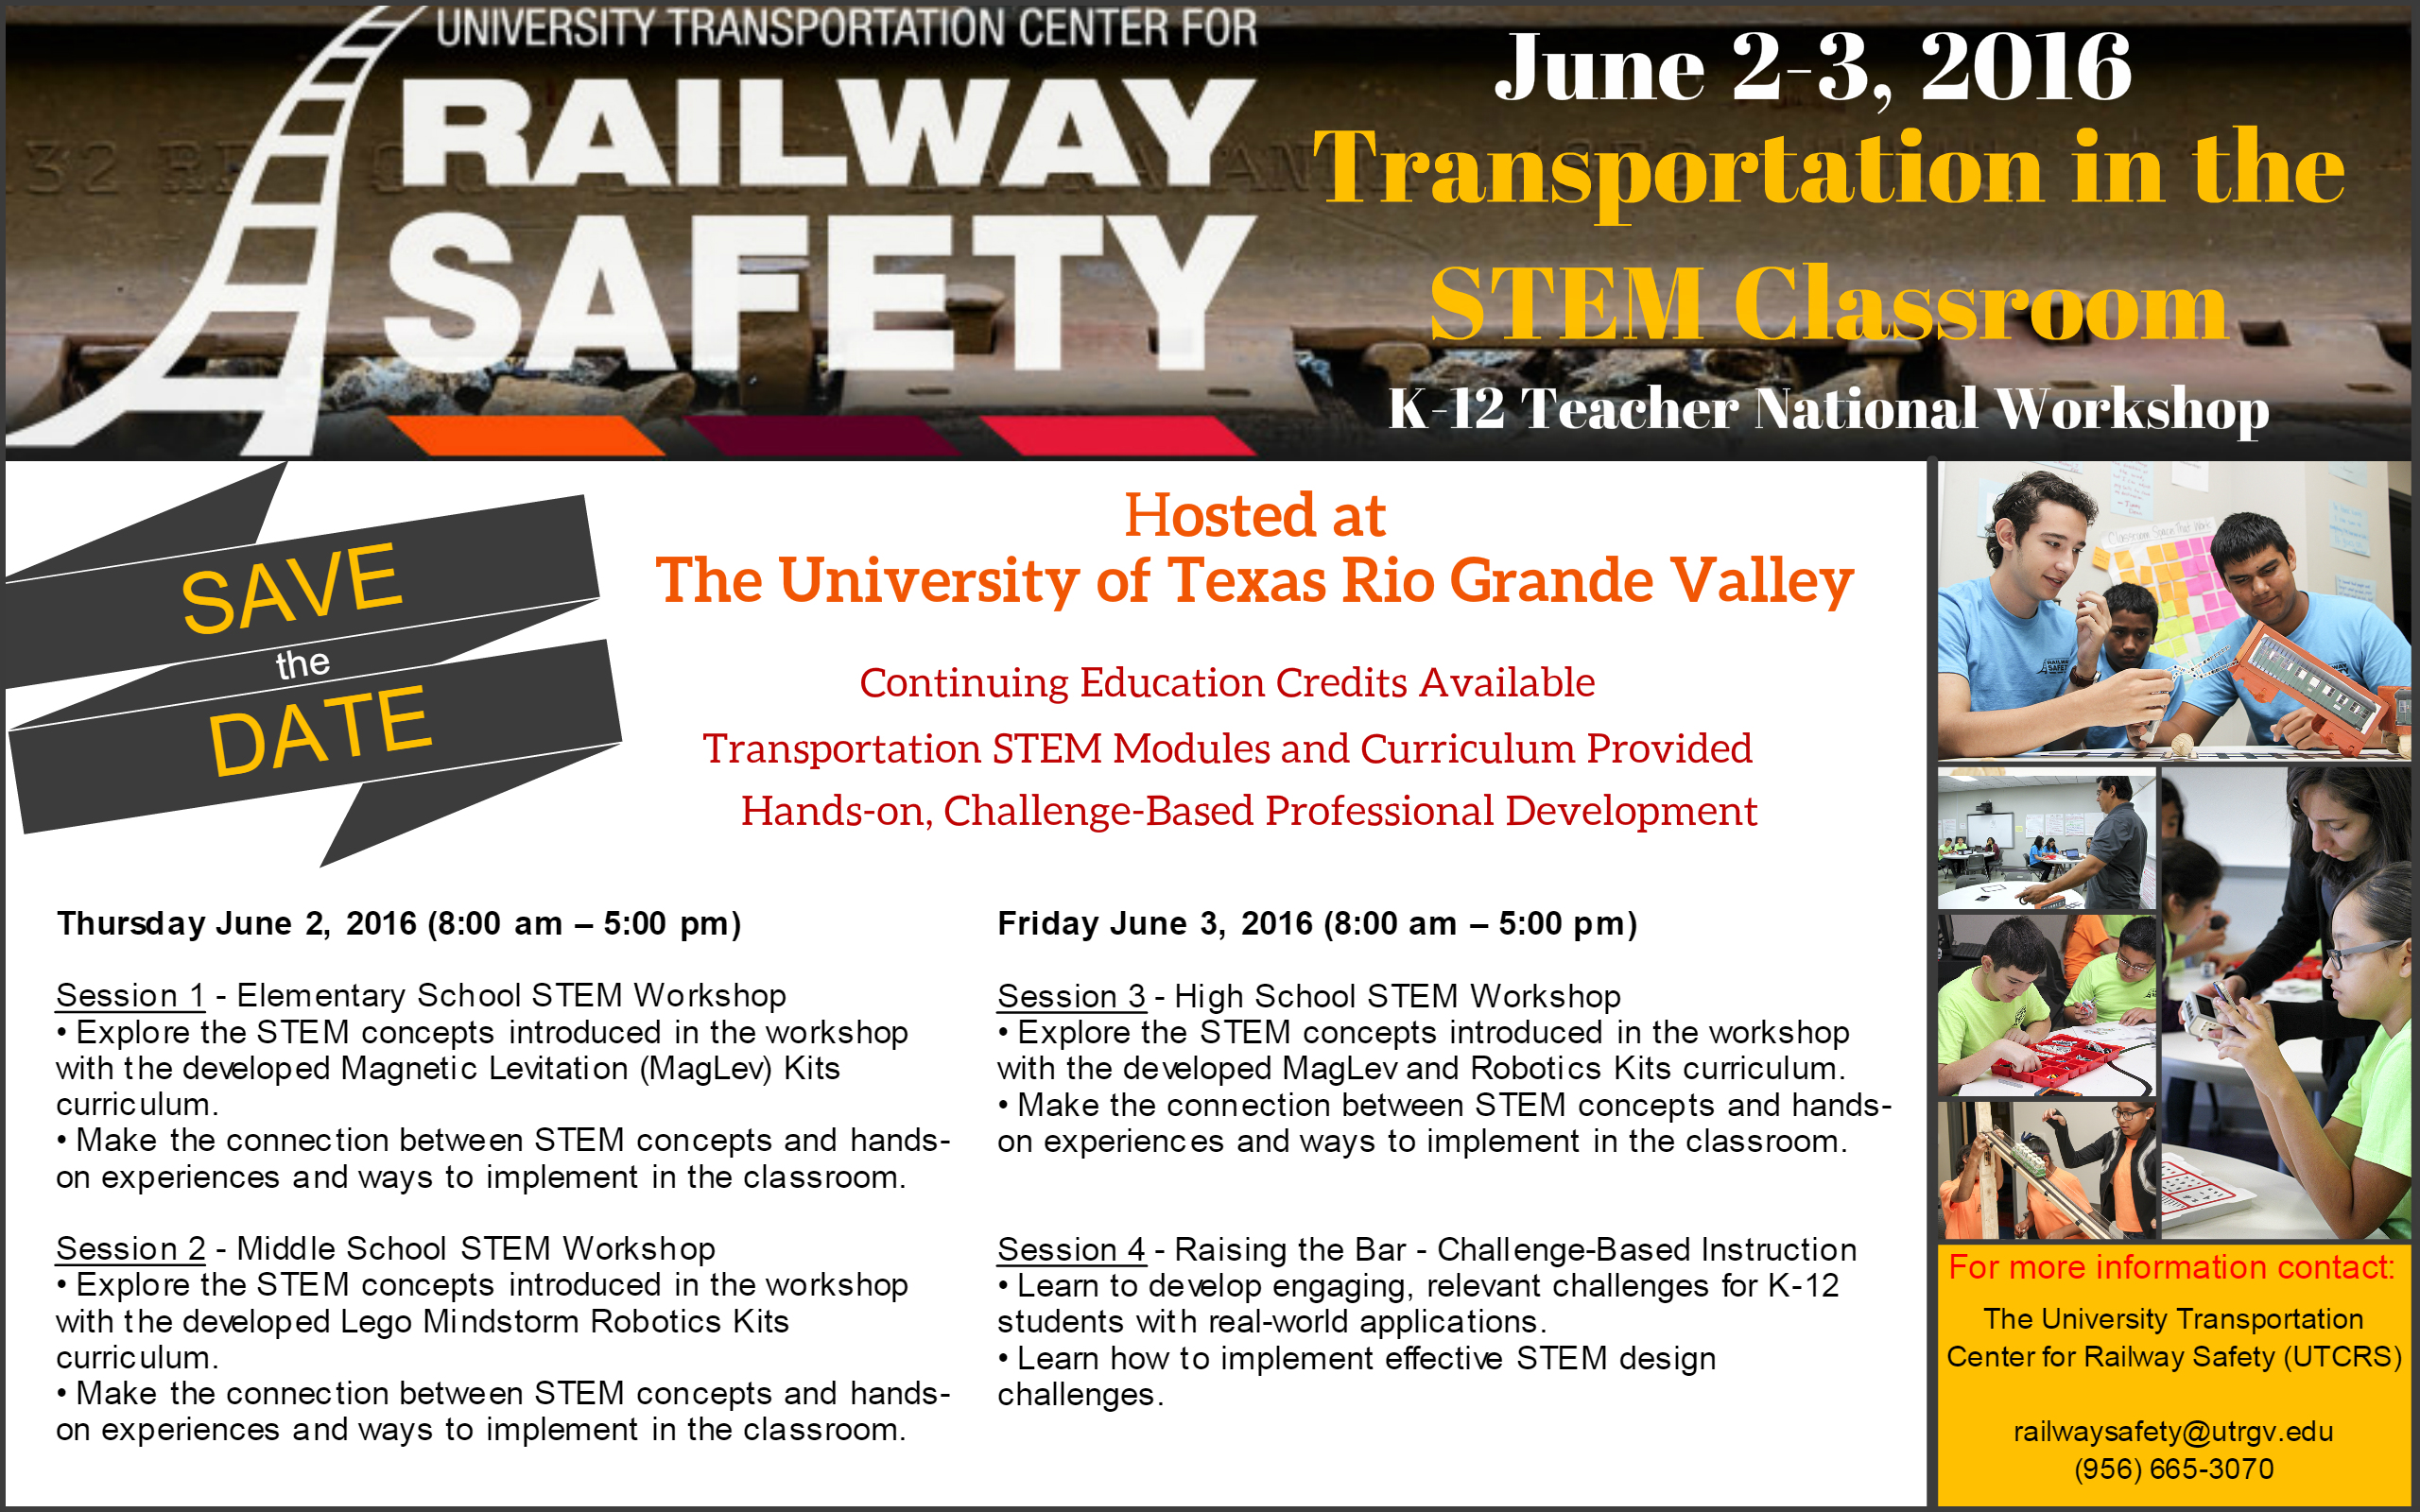 University Transportation Center for Railway Safety. June 2-3, 2016 Transportation in the STEM Classroom. K-12 Teacher National Workshop. Hosed at the University of Texas Rio Grande Valley. Continuing Education Credits Available Transportation STEM Modules and Curriculum Provided Hands-on, Challenge-Based Professional Development. Thursday June 2, 2016 8 AM to 5 PM. Session 1 Elementary School STEM Workshop. Explorer the STEM concepts of introduced in the workshop with the developed Magnetic Levitation MagLev Kits curriculum. Session 2 Middle School STEM Workshop. Explore the STEM concepts introduced in the workshop with the developed Lego Mindstorm Robotics Kits curriculum. Make the connection between STEM concepts and hands on experiences and ways to implement in the classroom. Friday June 3rd, 2016 8 AM to 5 PM. Session 3 High School STEM Workshop. Explore the STEM concepts introduced in the workshop with the developed MagLev and Robotics Kits curriculum. Make the connection between STEM concepts and hands on experiences and ways to implement in the classroom. Sesion 4 Raising the Bar, Challenge-based instruction. Learn to develop engaging, relevant challenges for K-12 students with real-world applications. Learn how to implement effective STEM design challenges. 